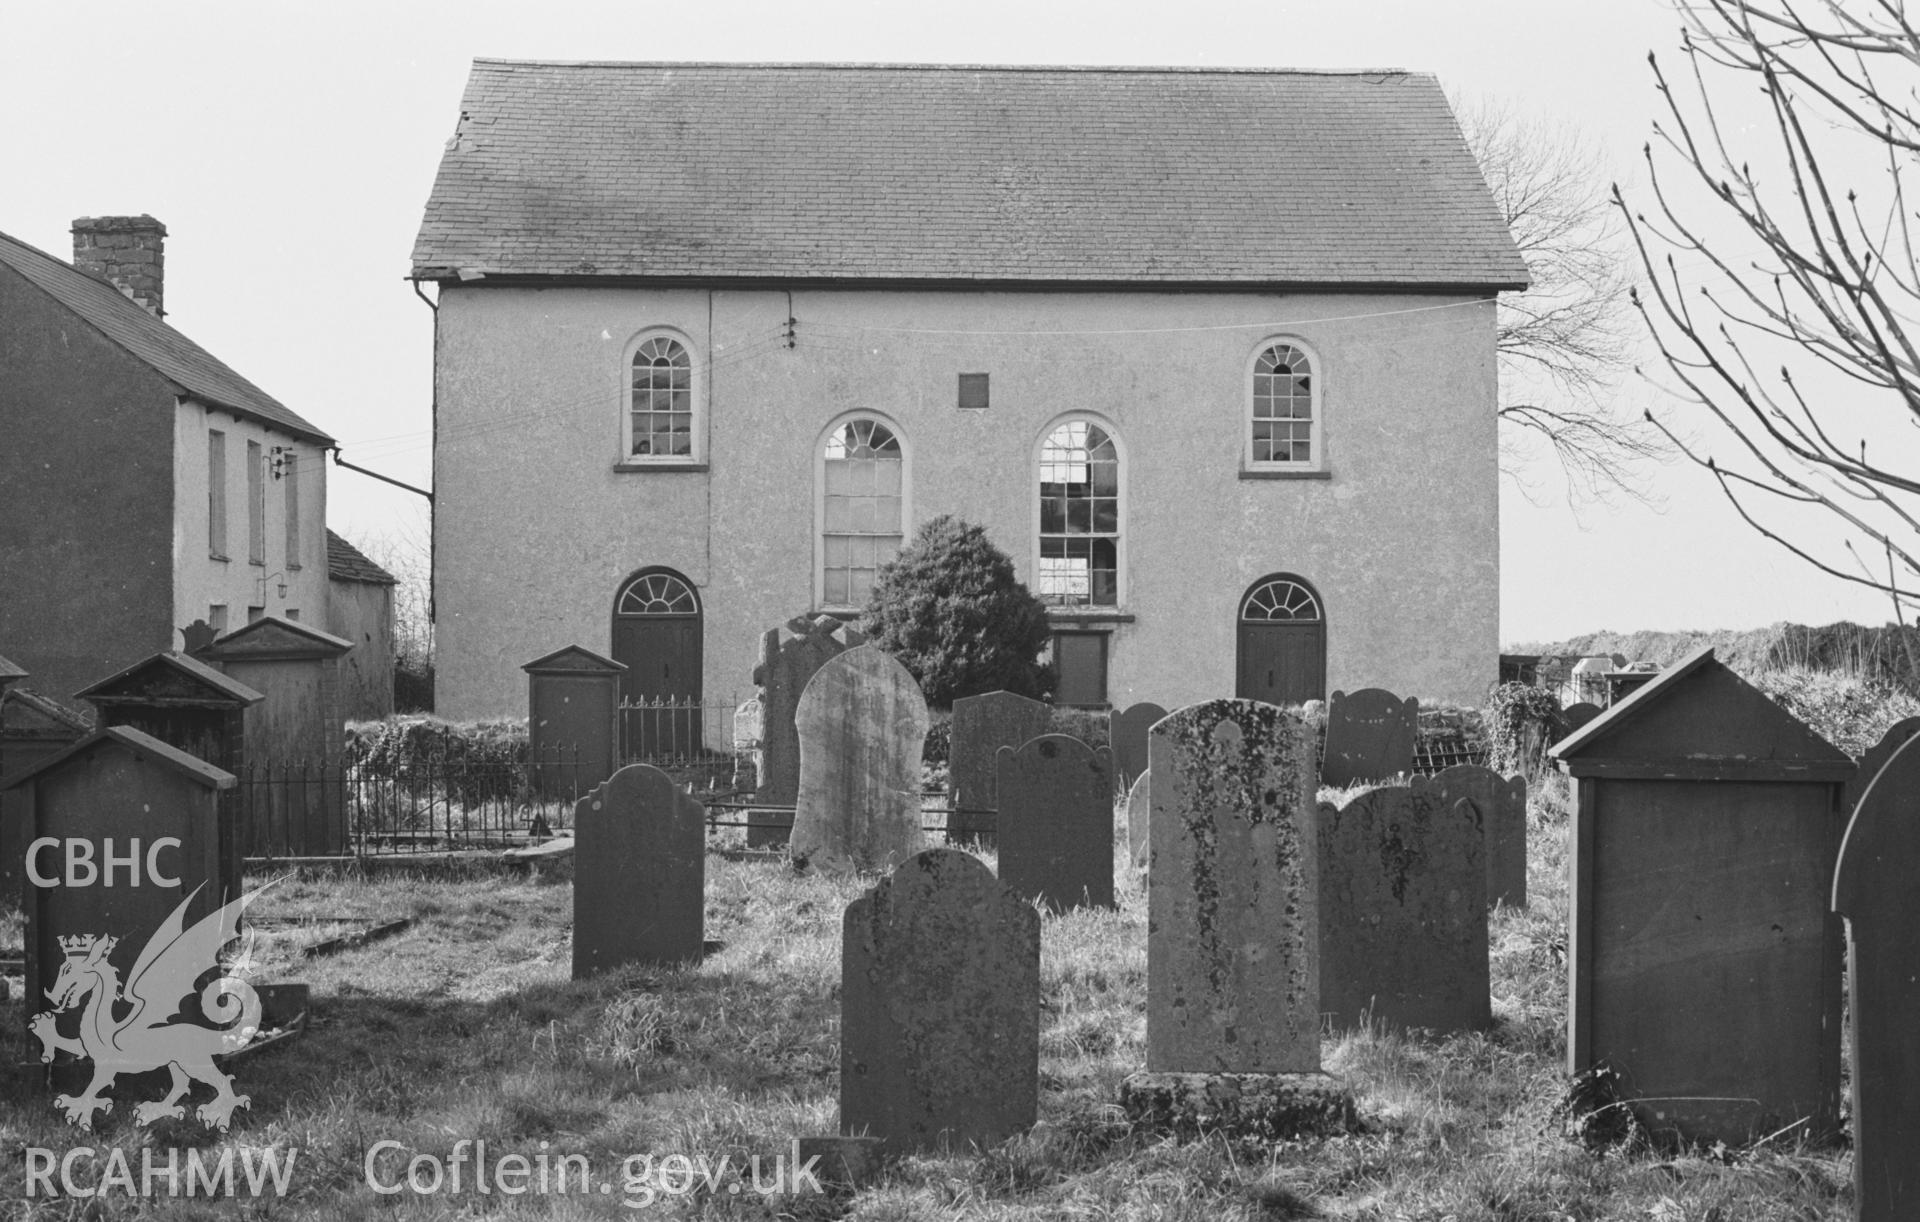 Digital copy of black & white negative showing exterior view of Pensarn Welsh Calvinistic Methodist chapel, Hafod Iwan, Caerwedros. Photograph by Arthur O. Chater, 11th April 1968, looking north north west from the graveyard at Grid Reference SN 381 548.